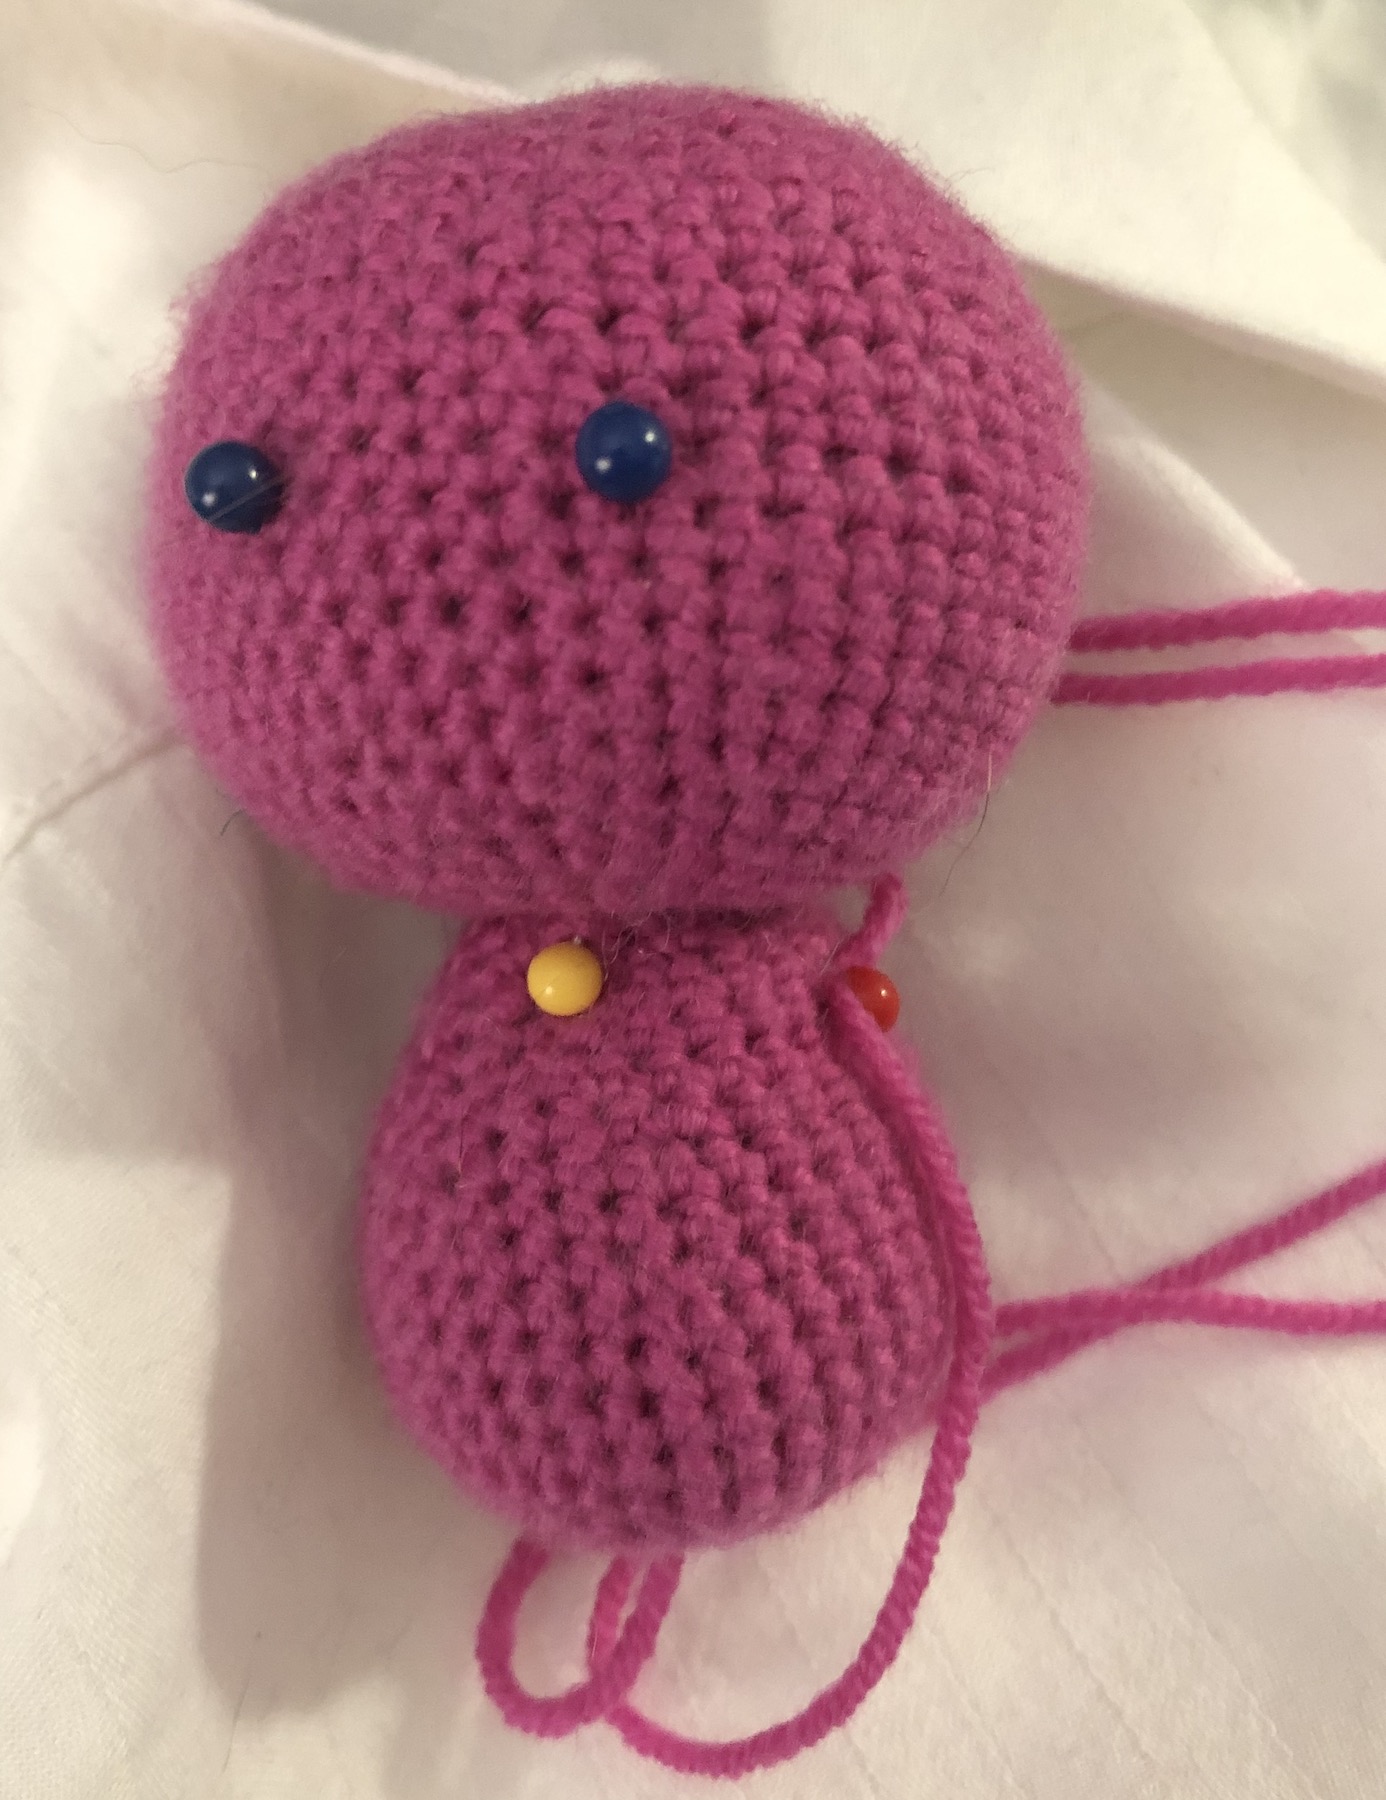 Hot pink crocheted head and body only, with pins in place of eyes